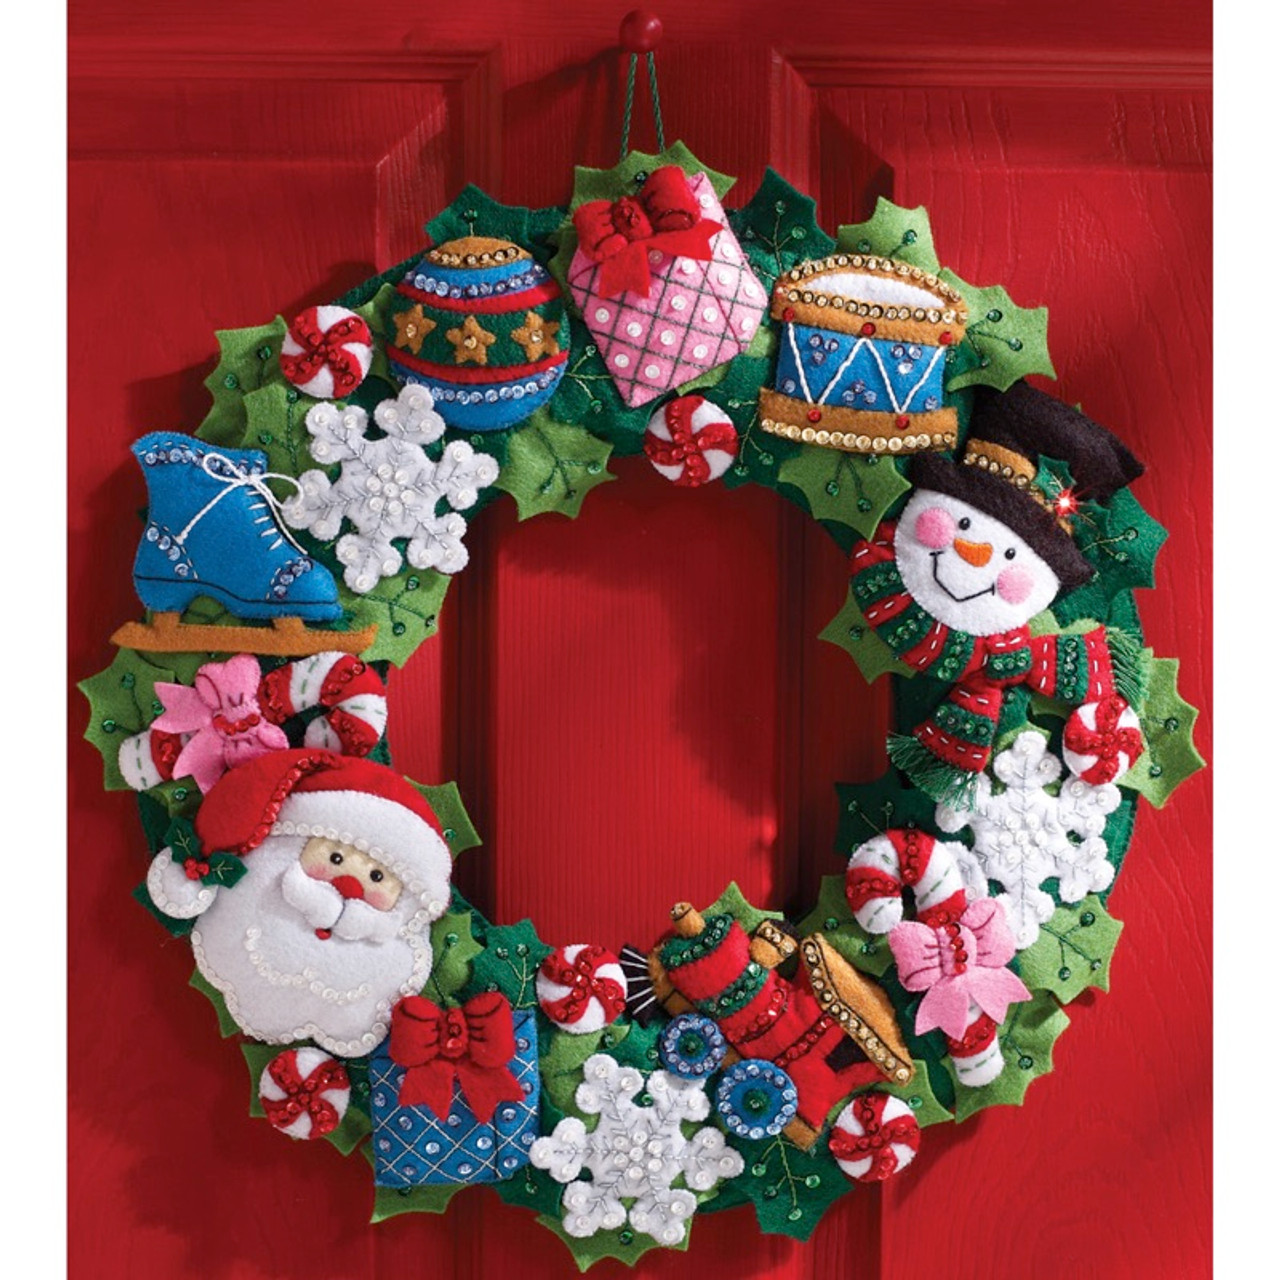 Bucilla Felt Table Top Centerpiece Kits for Christmas - Crafters